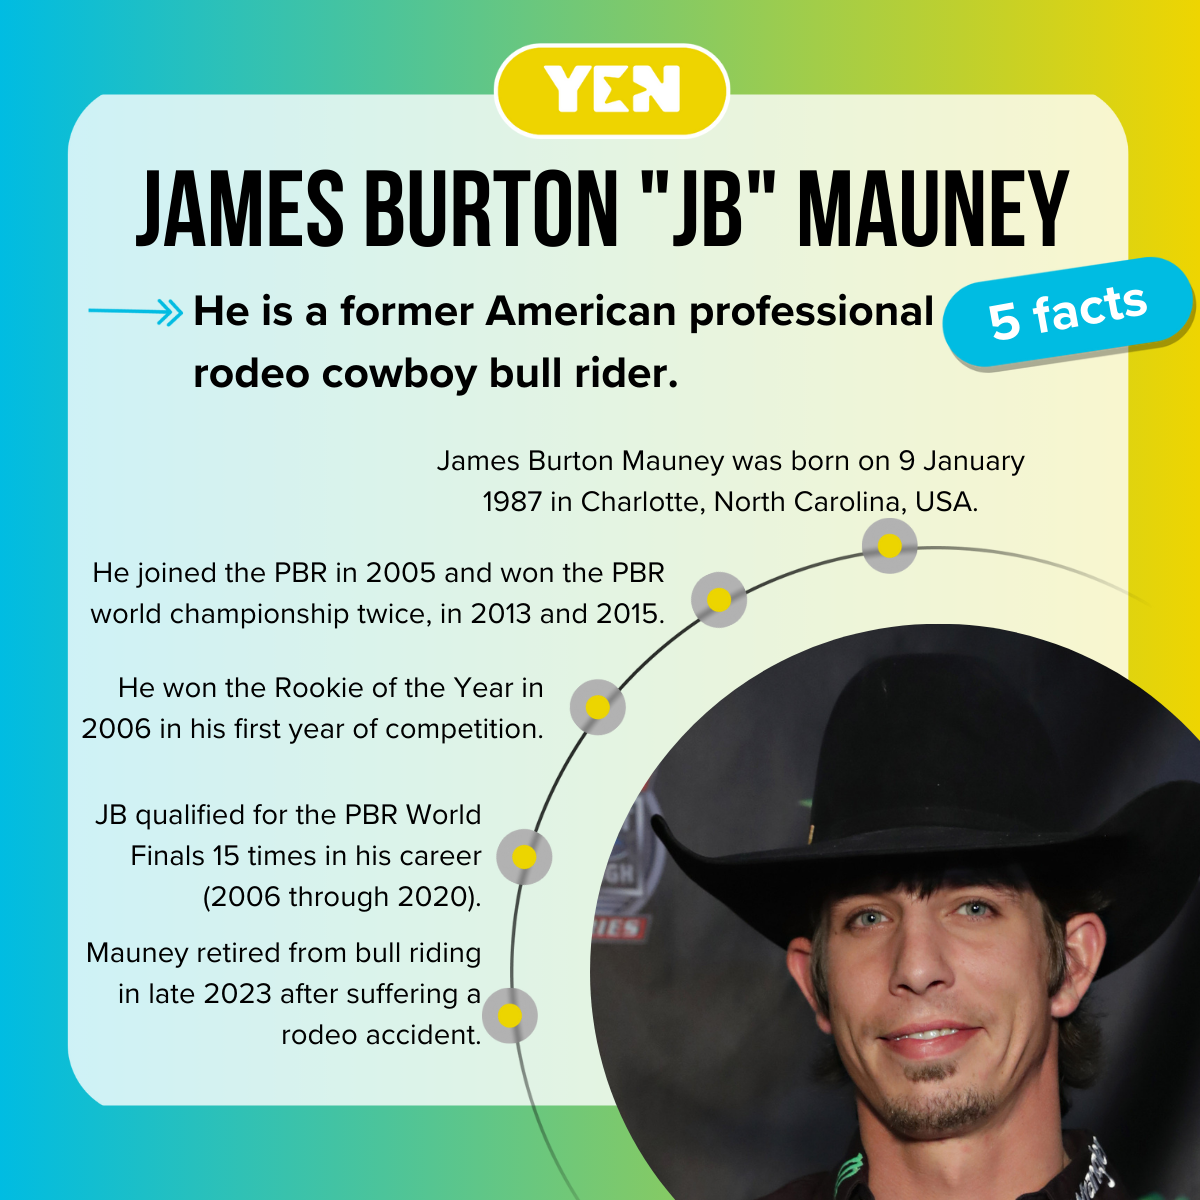 Five facts about JB Mauney.